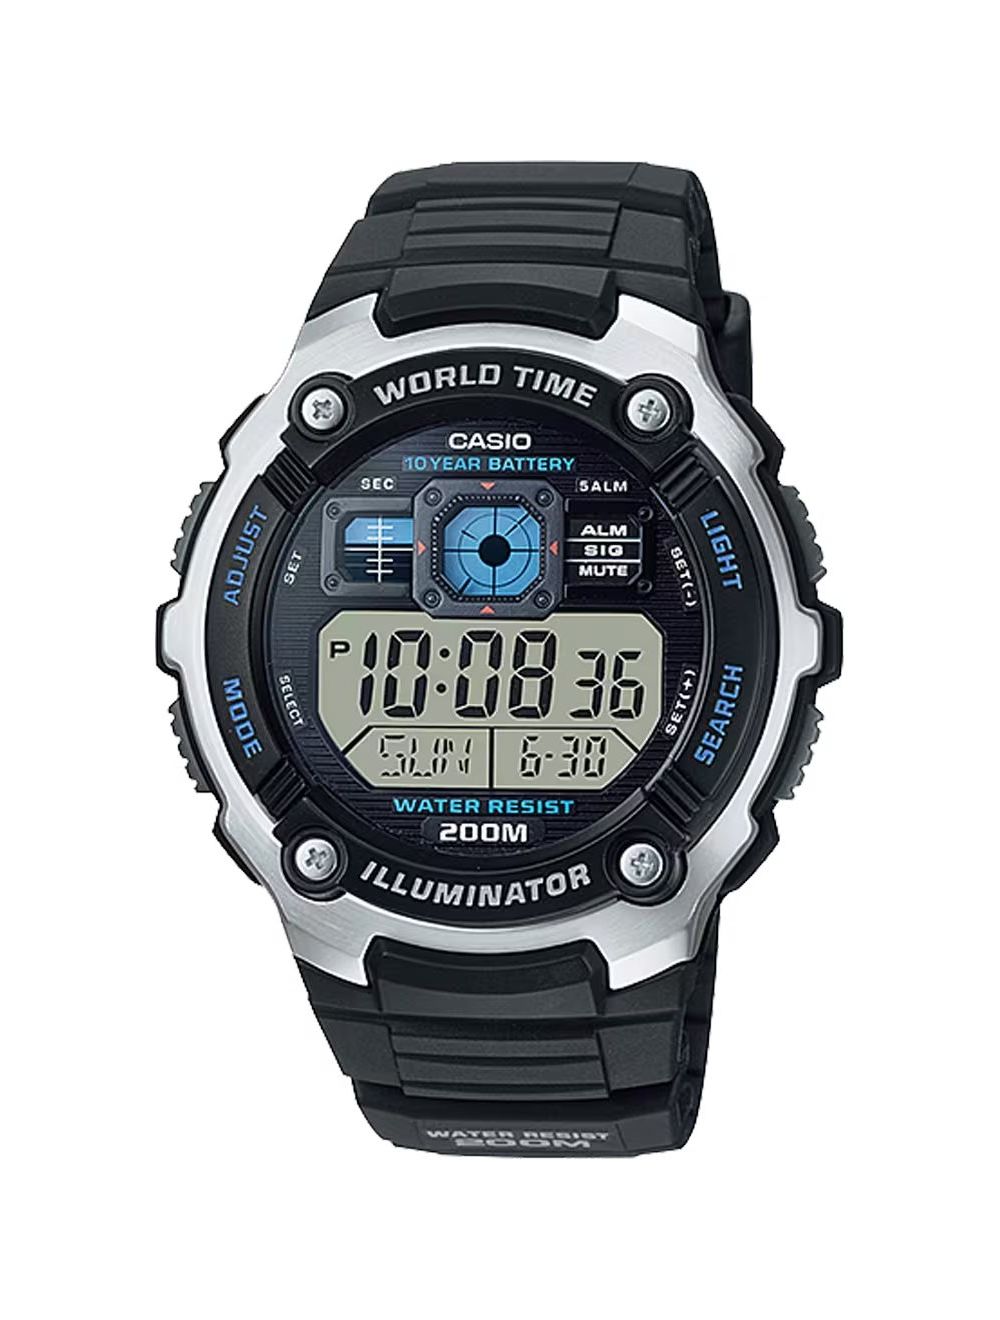 Classic World Time Digital Watch w/ 200 Meter Water-Resistance